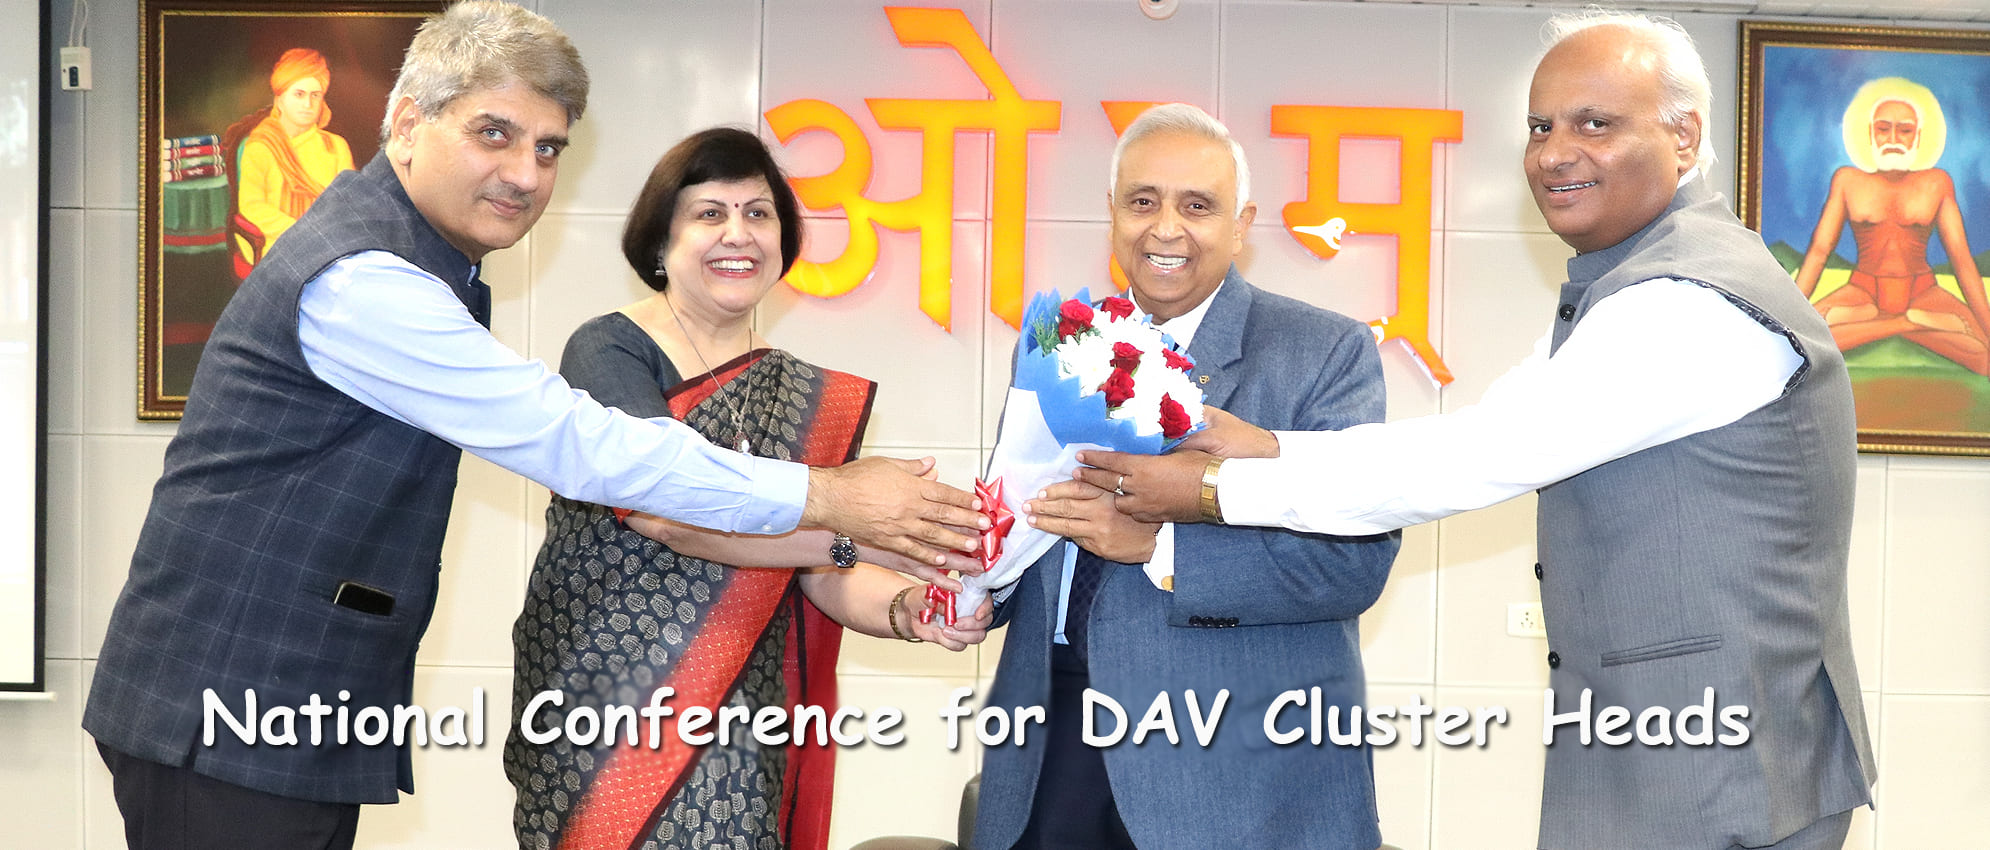 Conference for DAV Cluster Heads